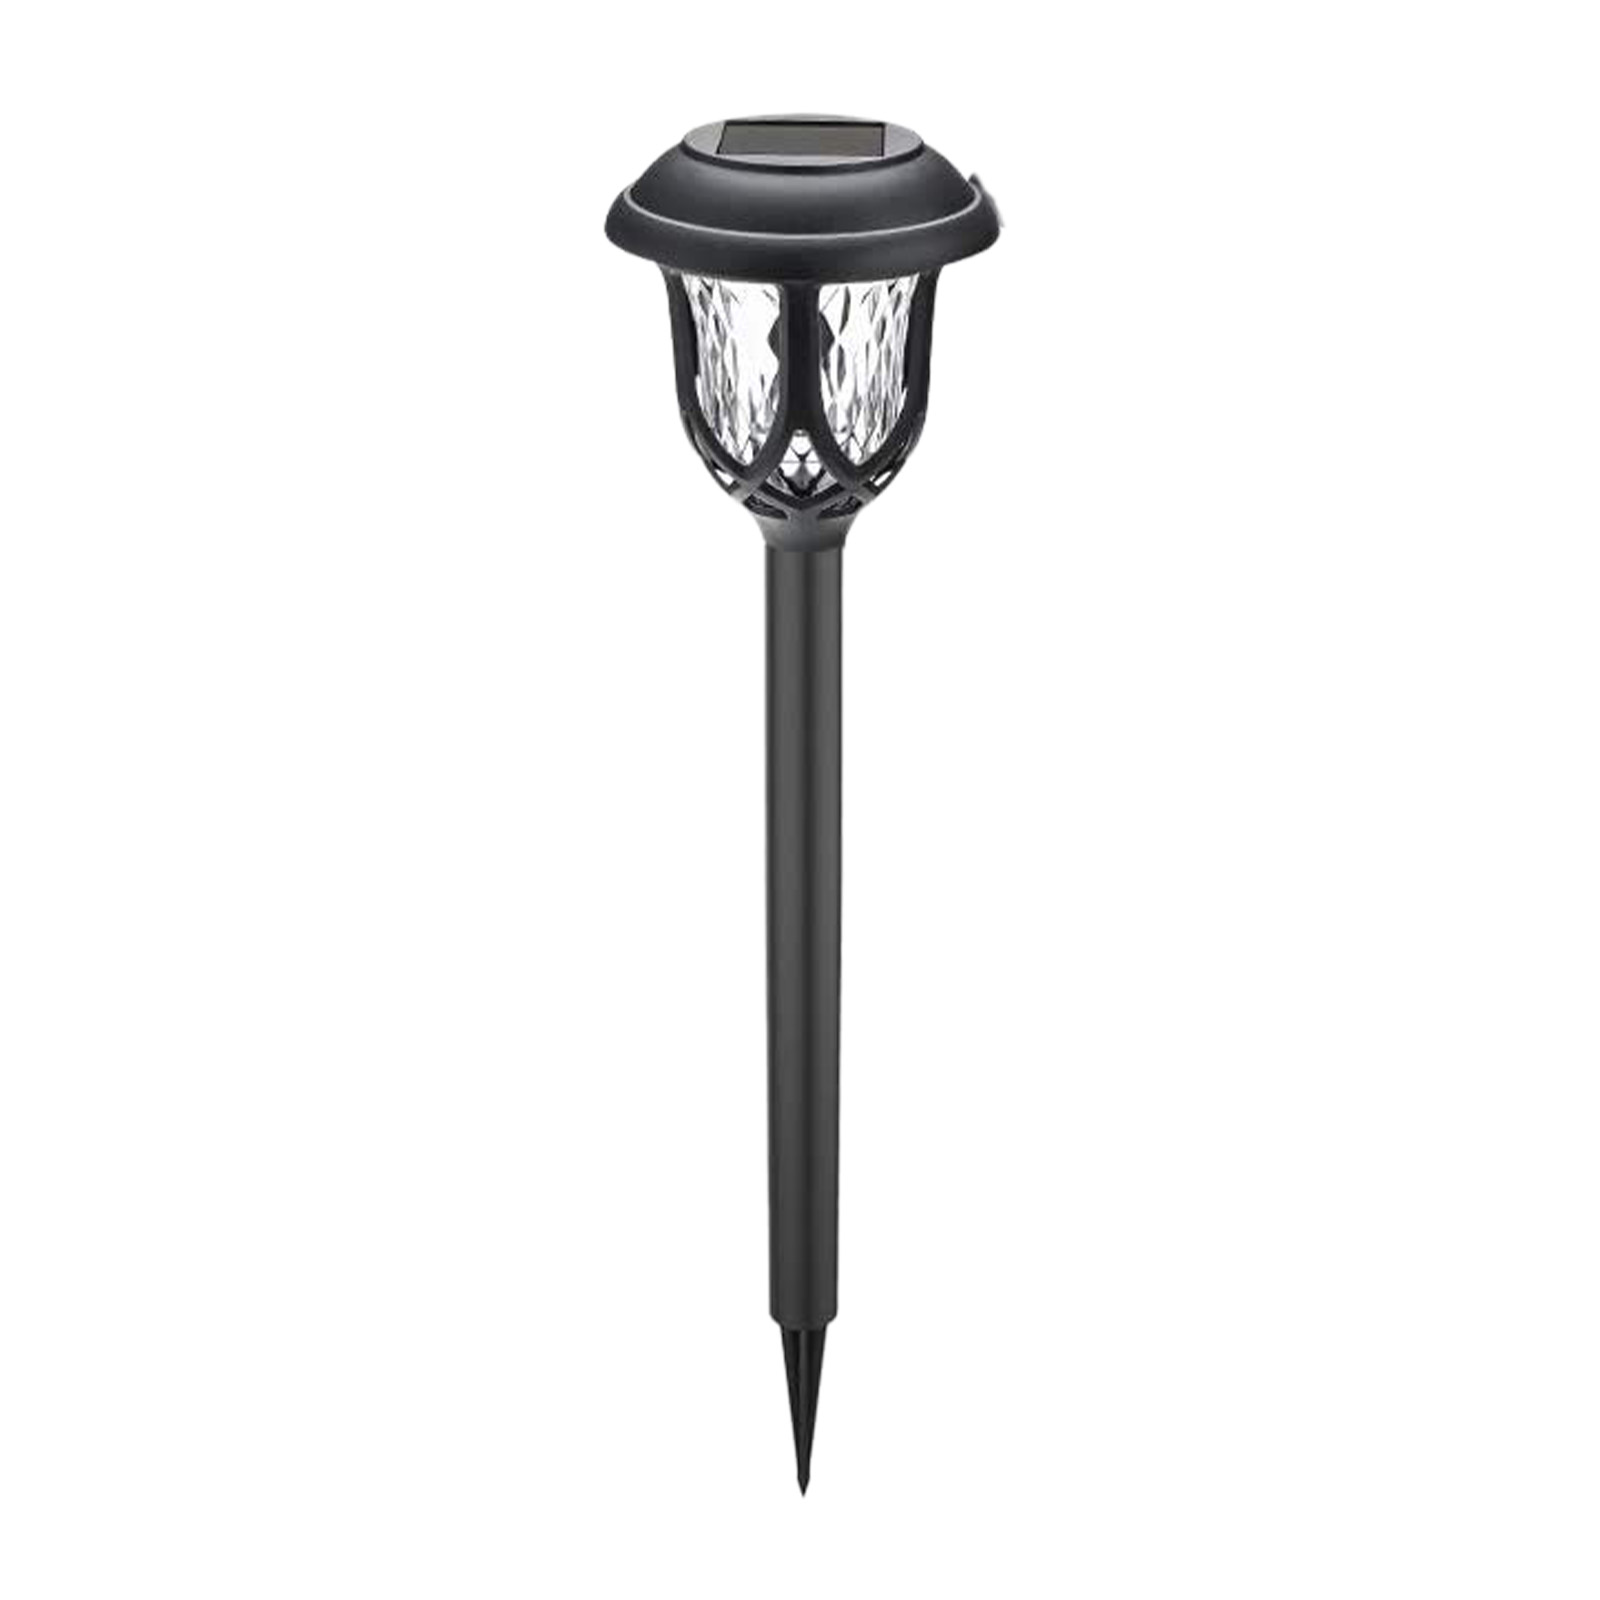 Solar Pathway Lights Outdoor 10 Pack Waterproof Auto On/Off Outdoor Solar Lights For Yard Landscape Path Lawn Patio Walkway Black - warm light